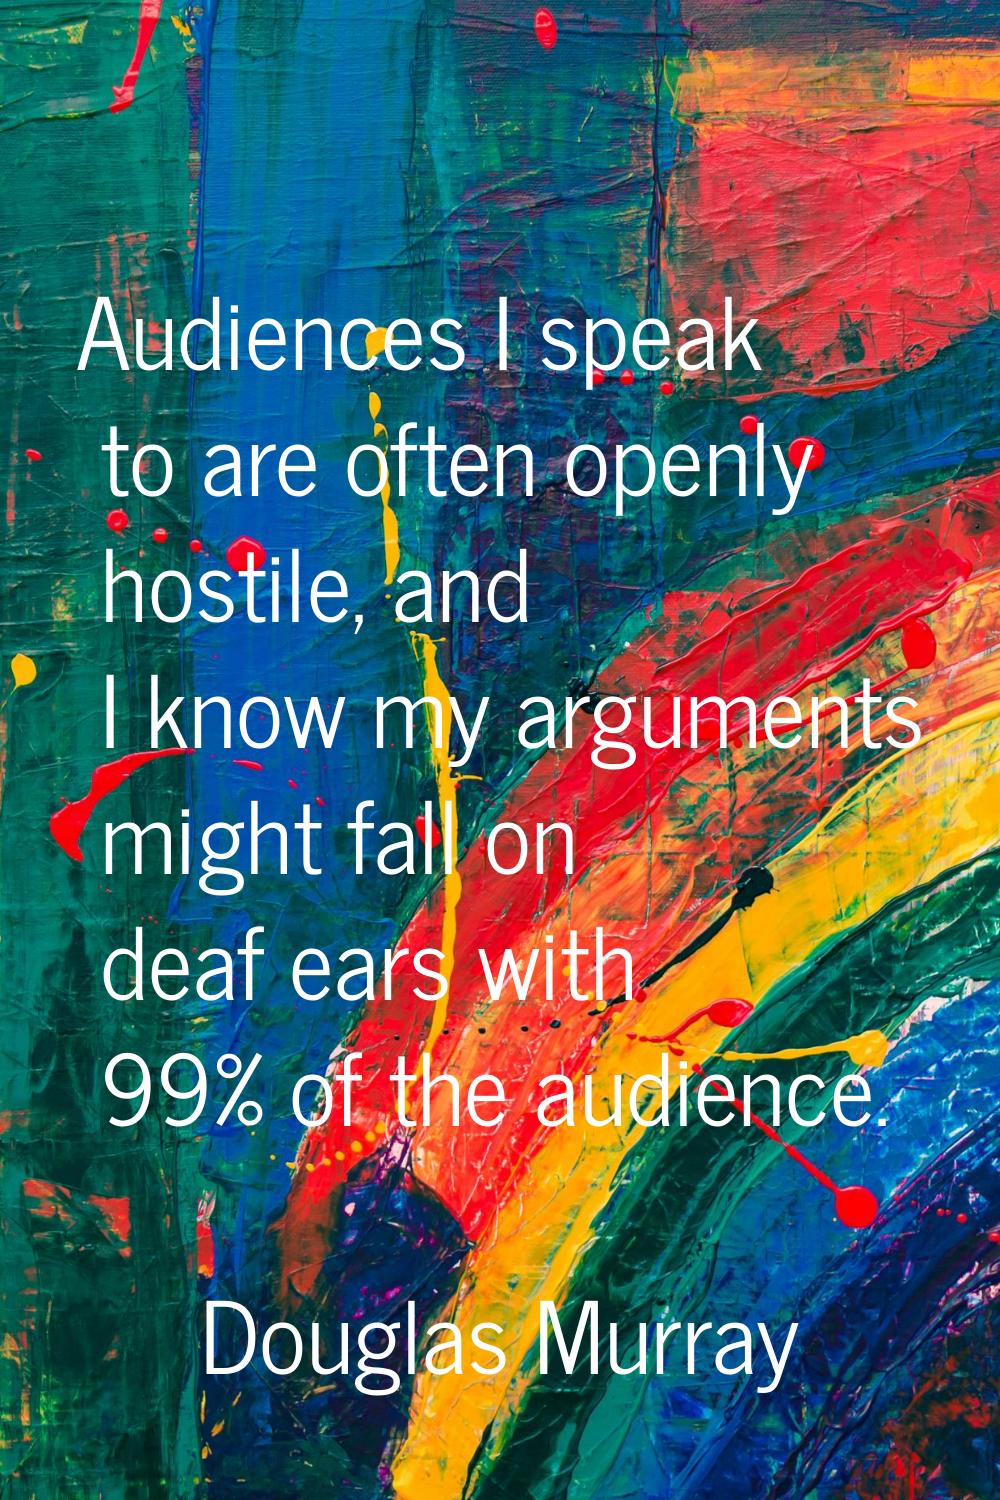 Audiences I speak to are often openly hostile, and I know my arguments might fall on deaf ears with